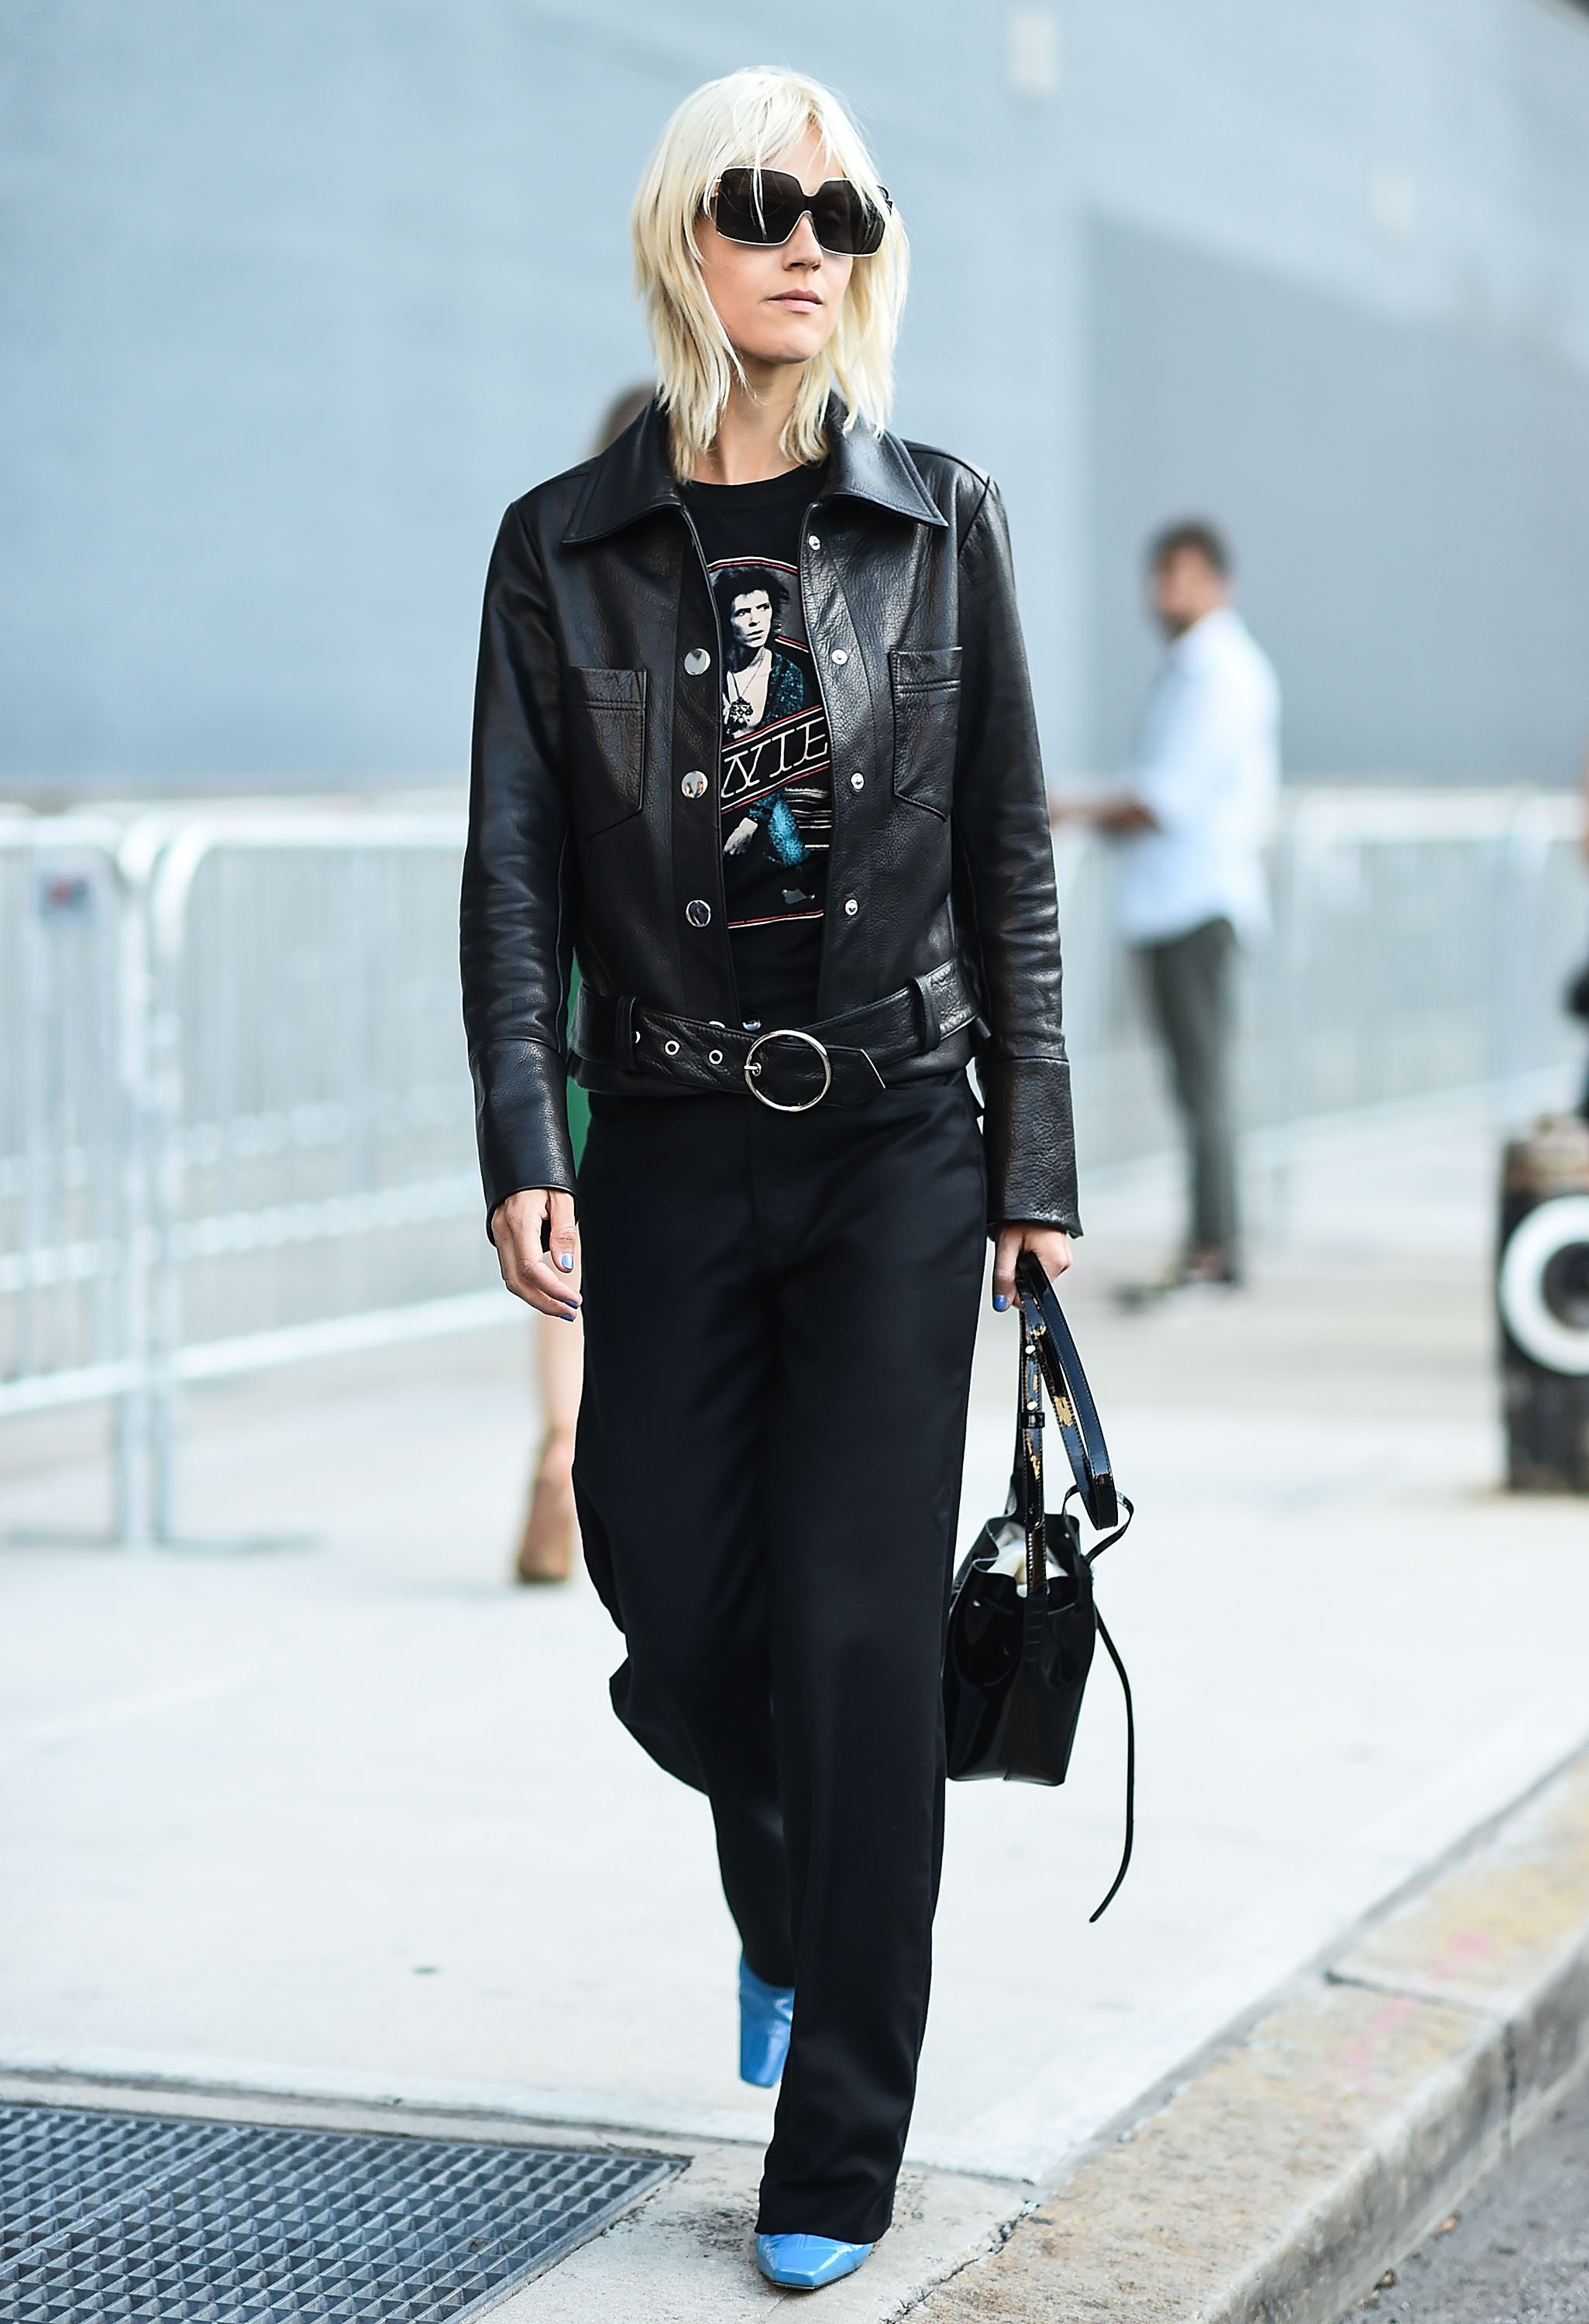 An edgy all-black look gave rocker vibes at the shows.